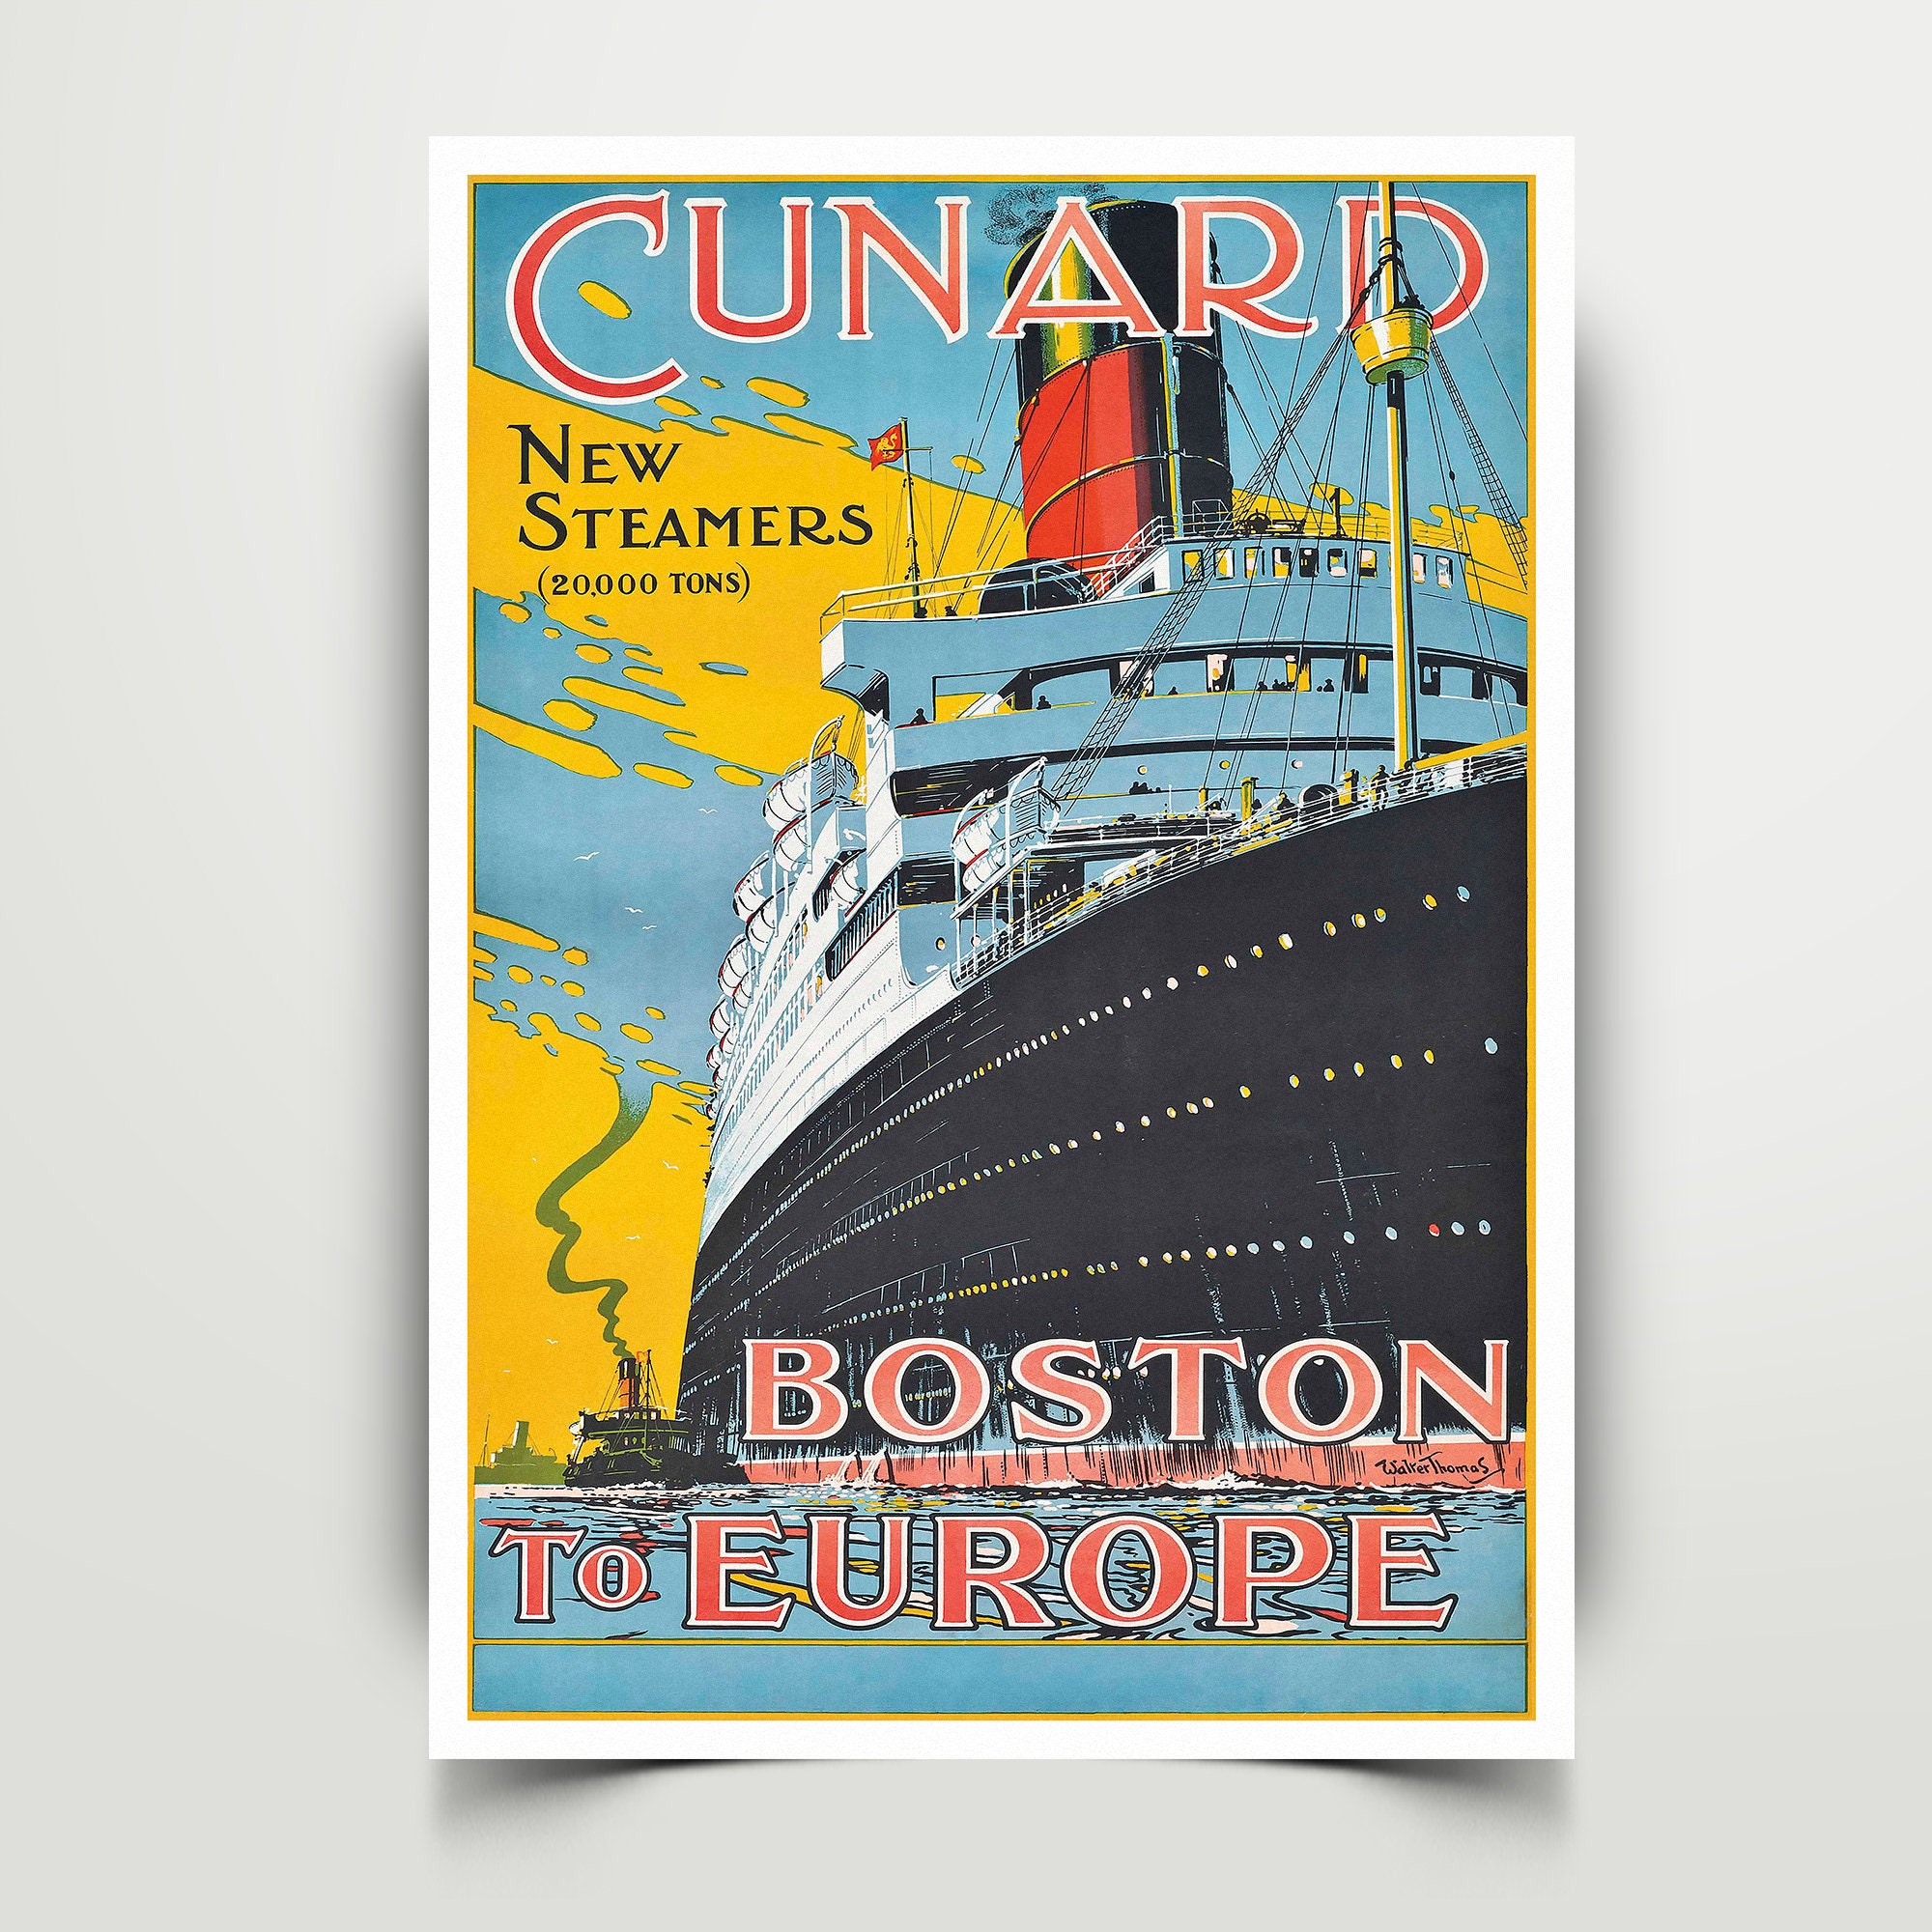 TX217 Vintage Cunard Europe To America Cruise Ship Travel Poster Re-Print A2/A3 